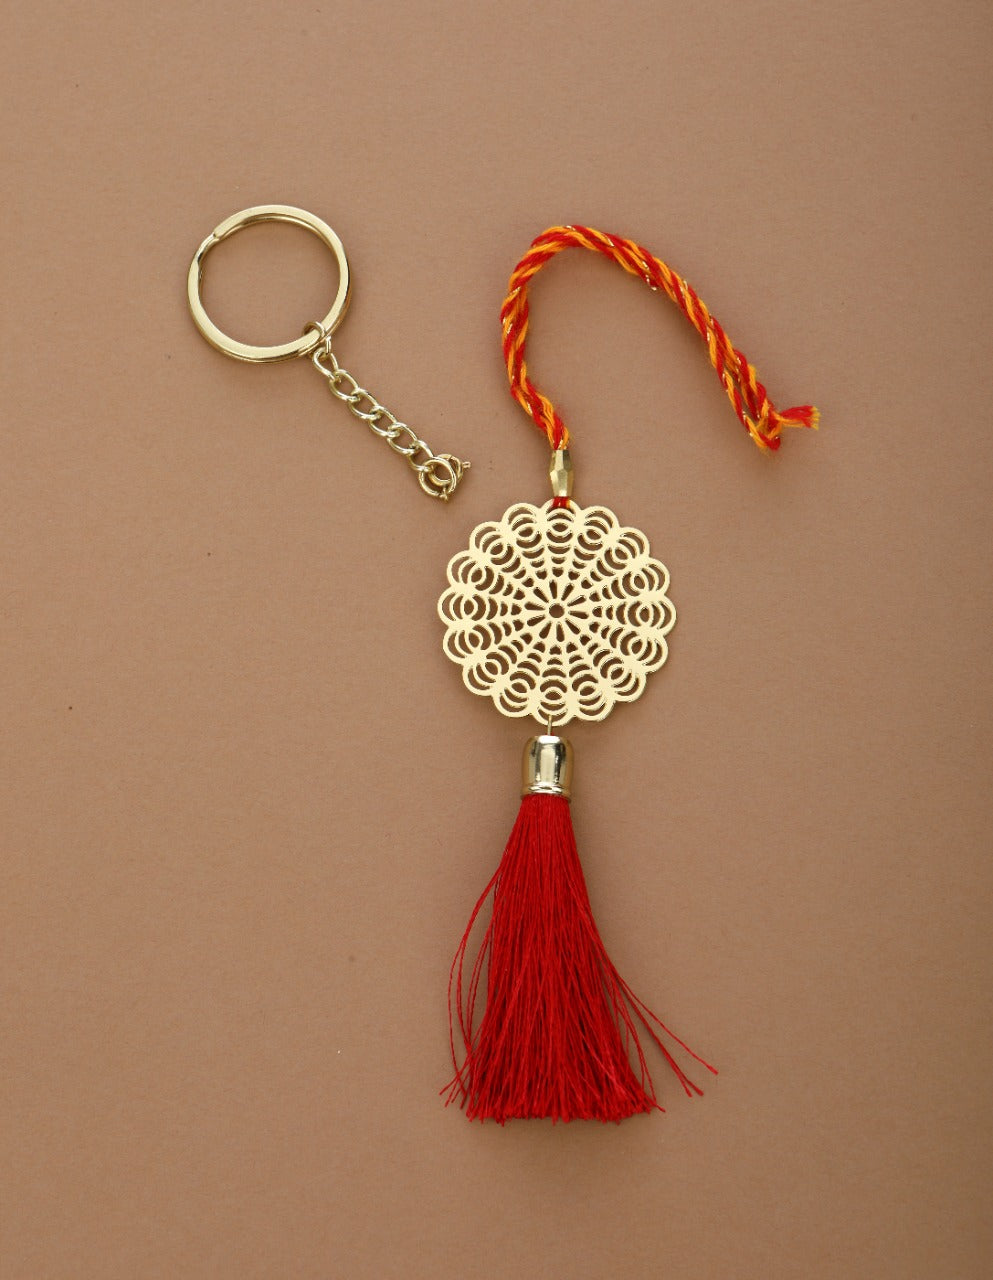 ADORAA's Floral design Rakhi for bhabi with red hanging tassel cum keychain ring crafted in brass with golden finish